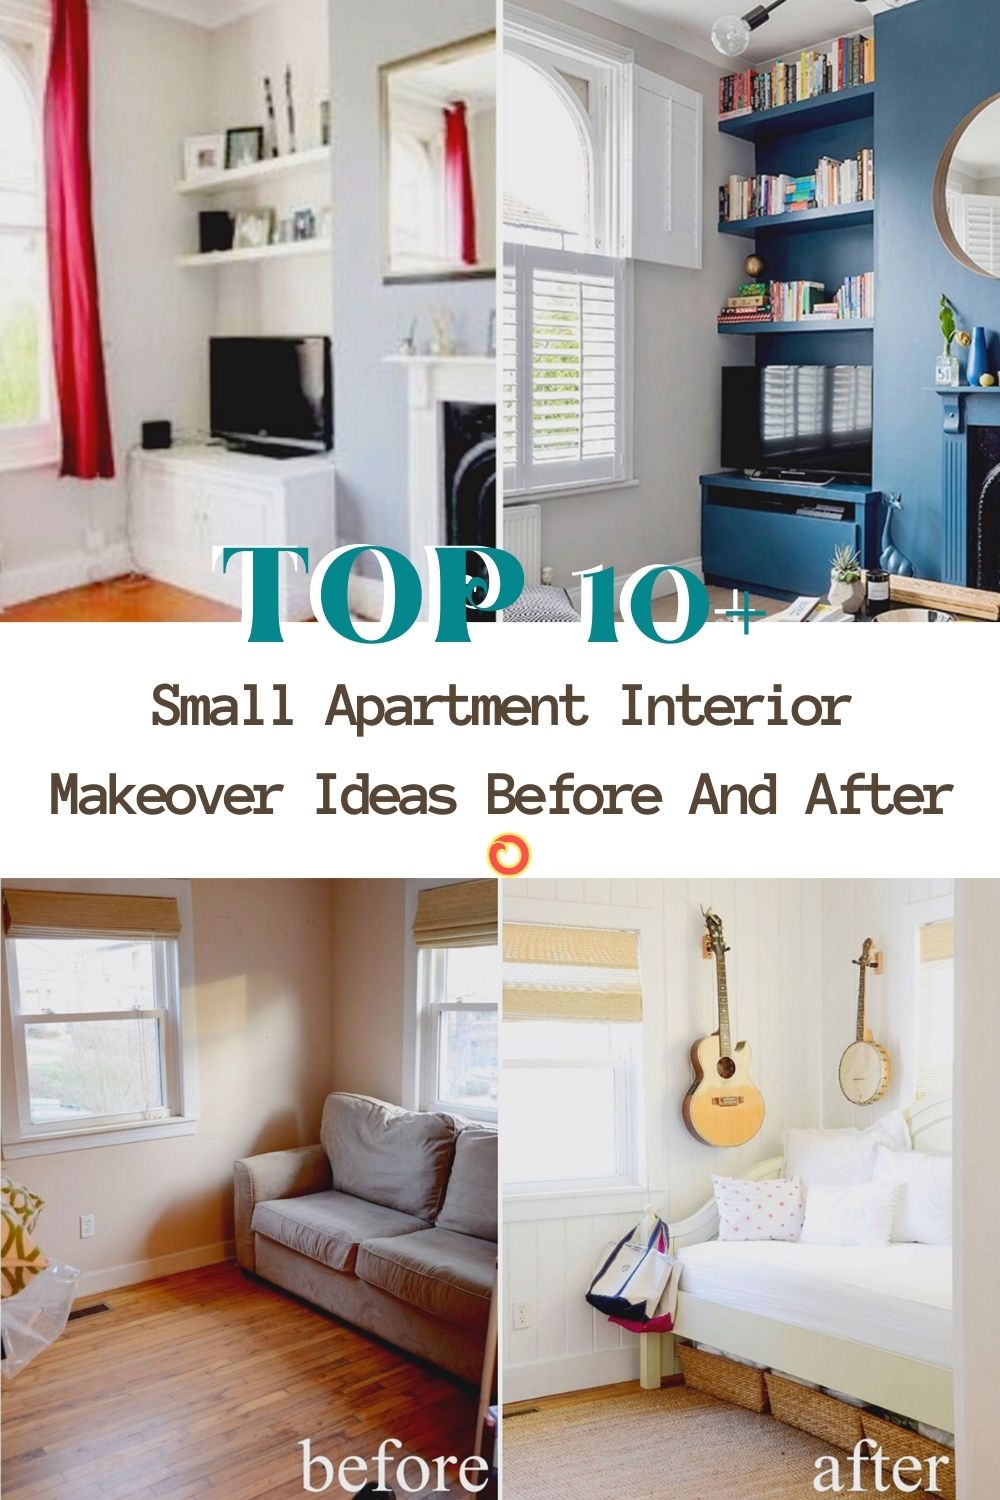 Top 10 Small Apartment Interior Makeover Ideas Before And After